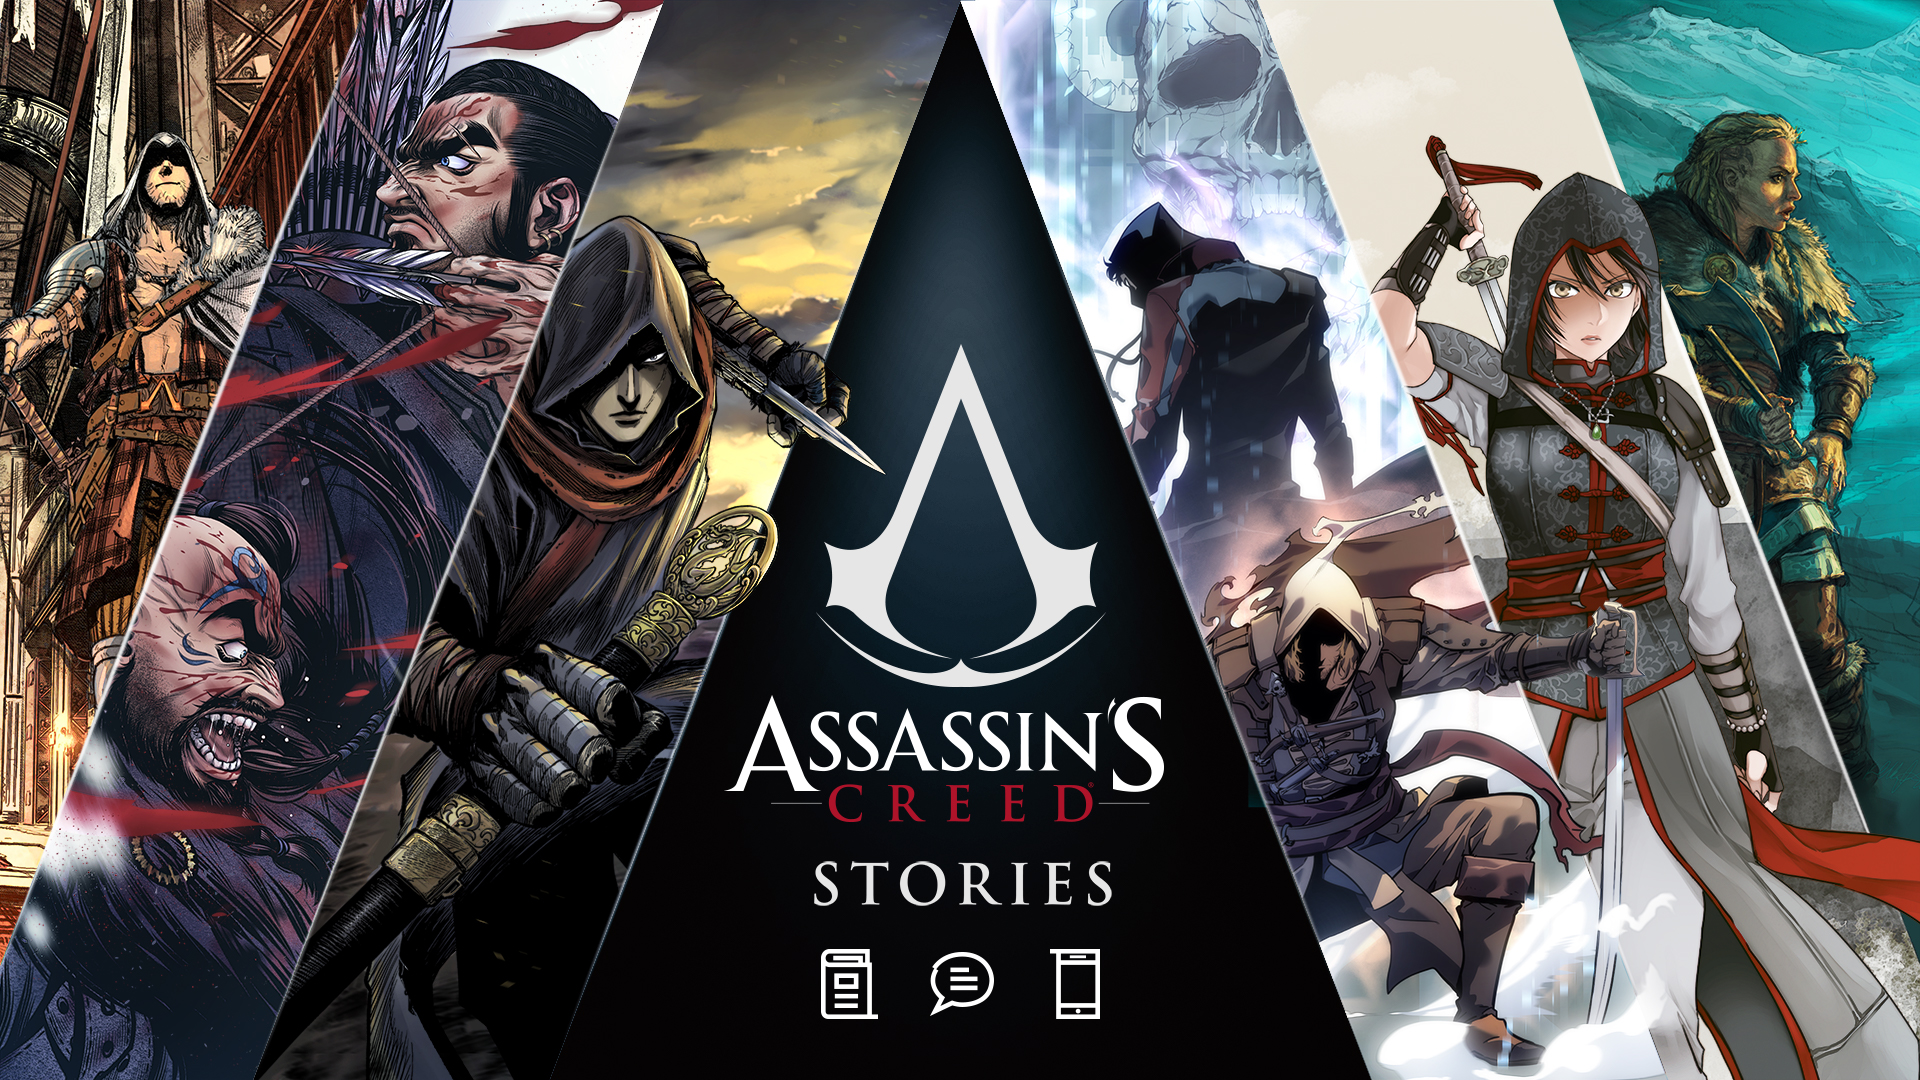 Assassin’s Creed Stories